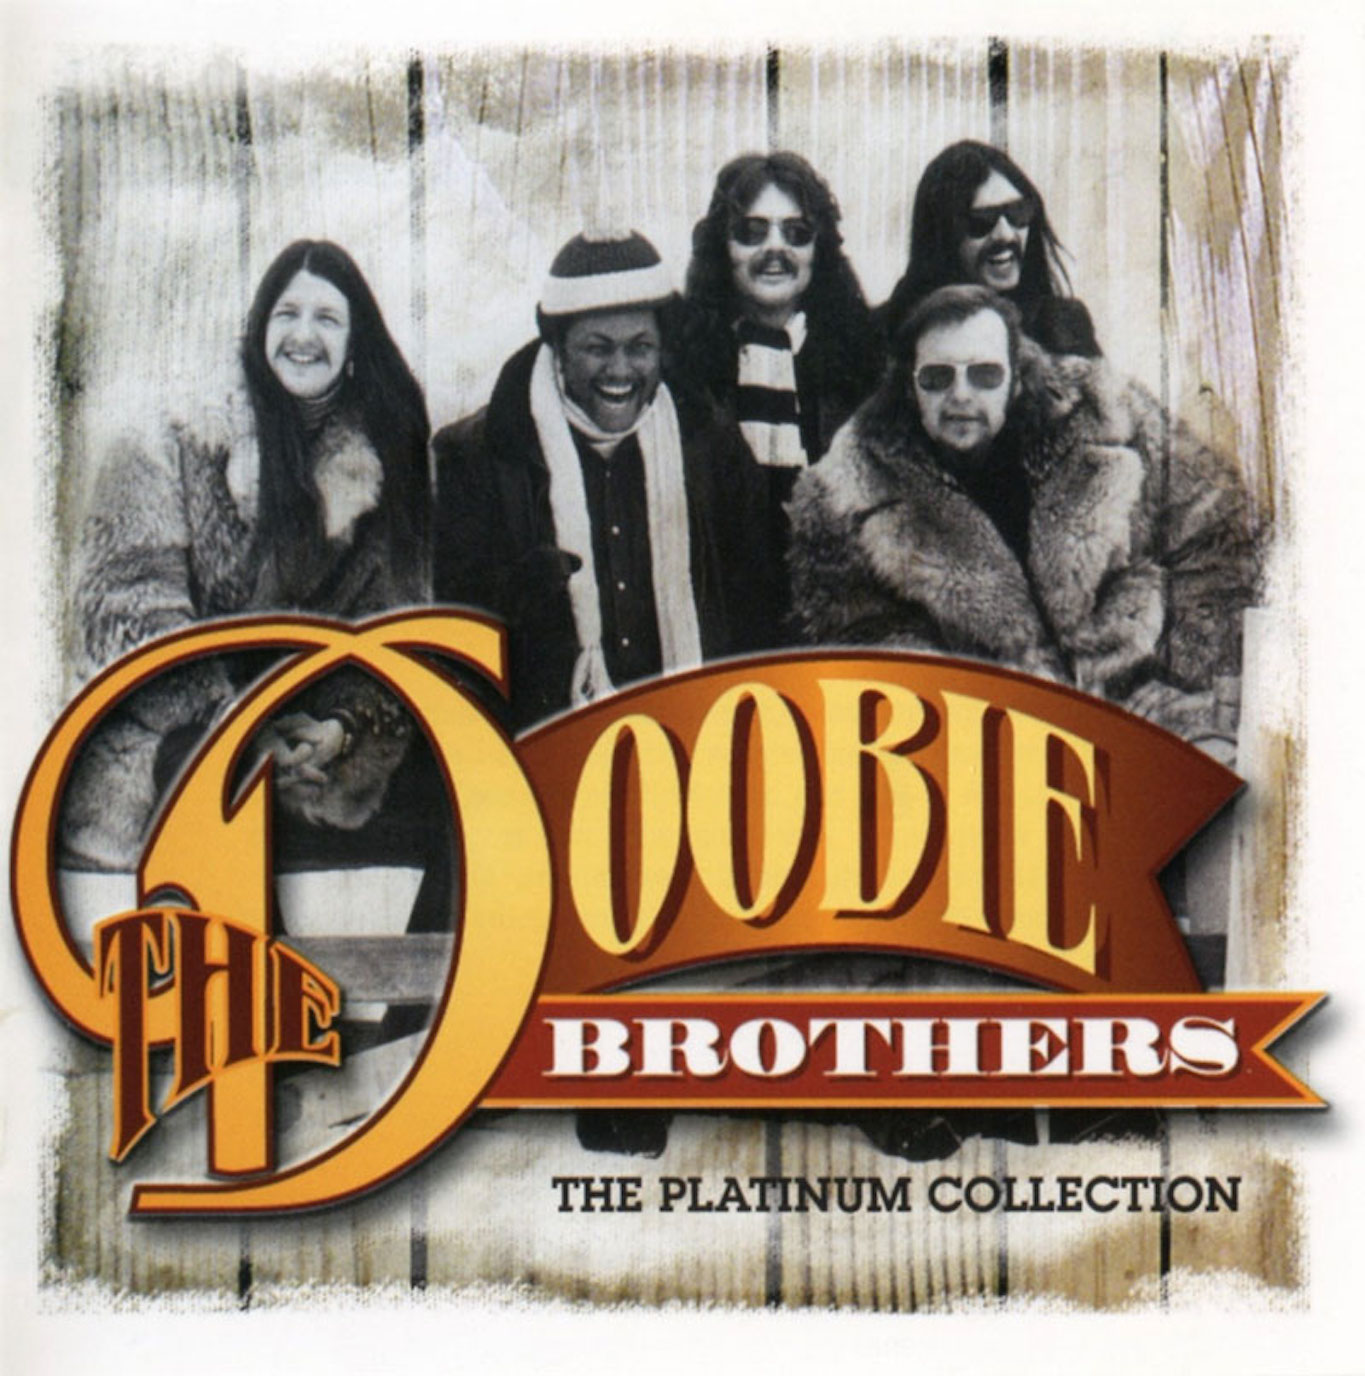 Collection 2007. The Doobie brothers. Фото the Doobie brothers. The Doobie brothers album. Doobie brother - the Captain and me ' 1973 CD Covers.